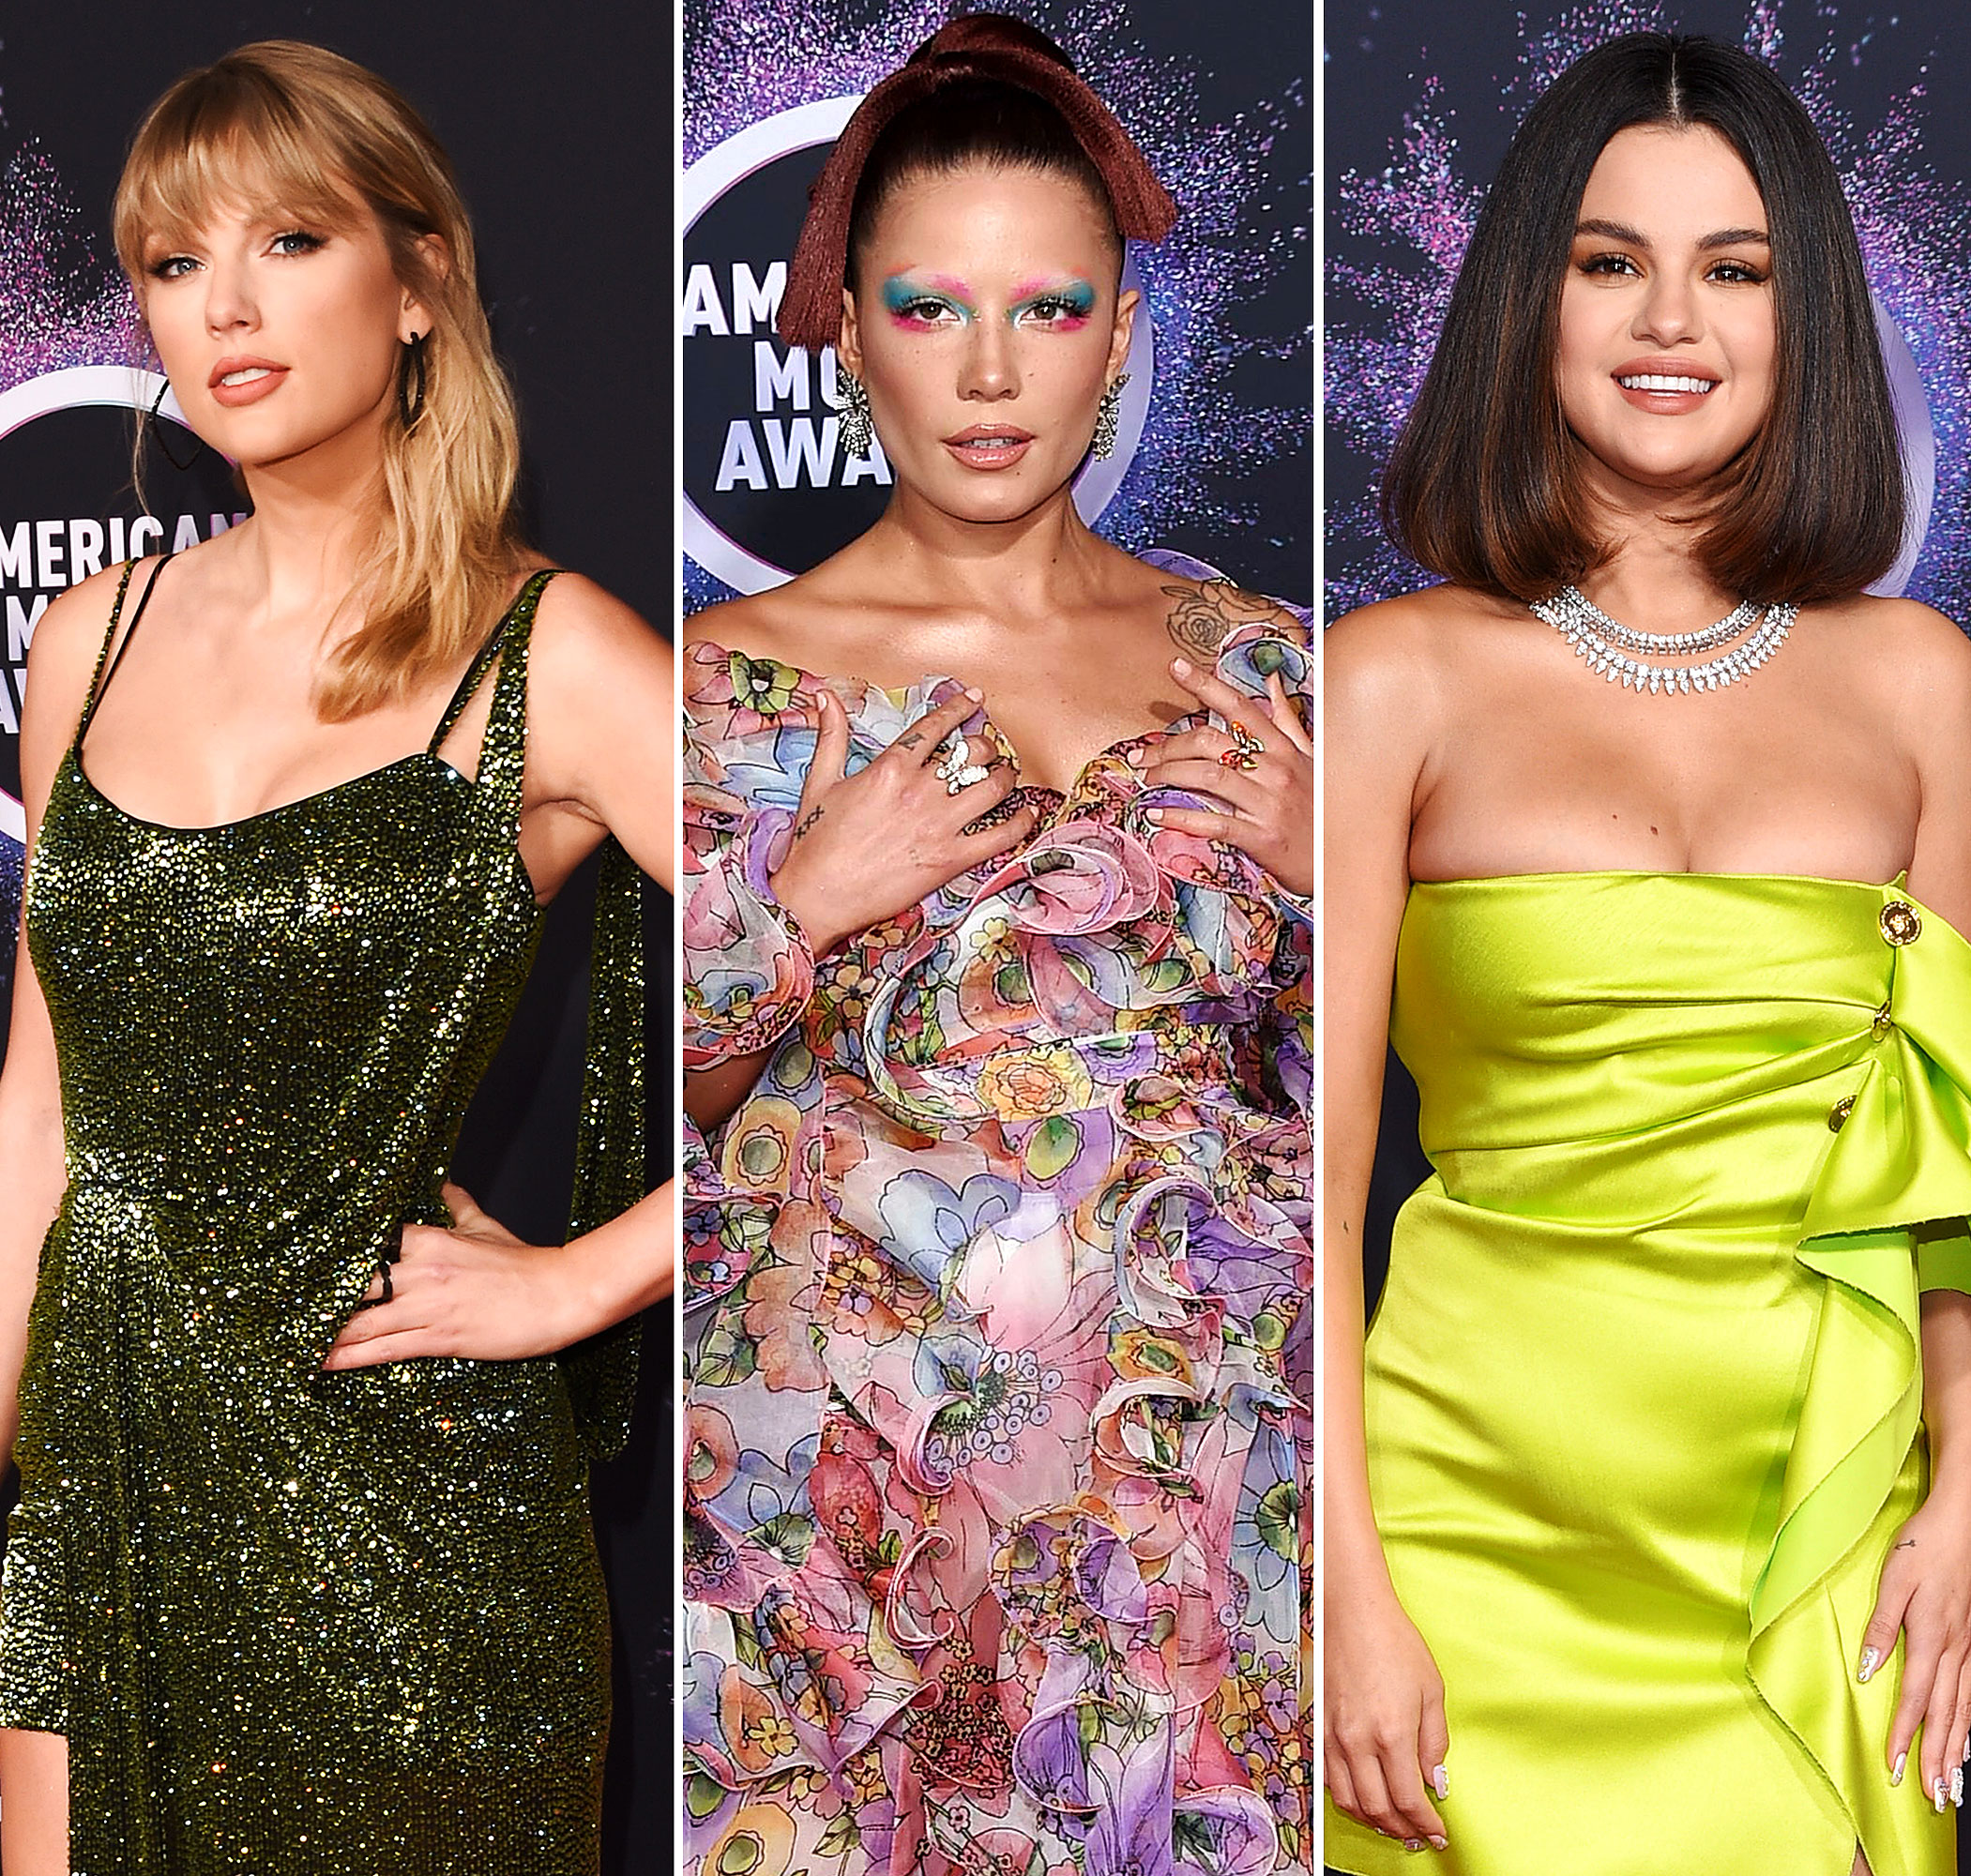 Taylor Swift Sexiest Moments - Taylor Swift and Halsey Support Selena Gomez's 2019 AMAs Performance